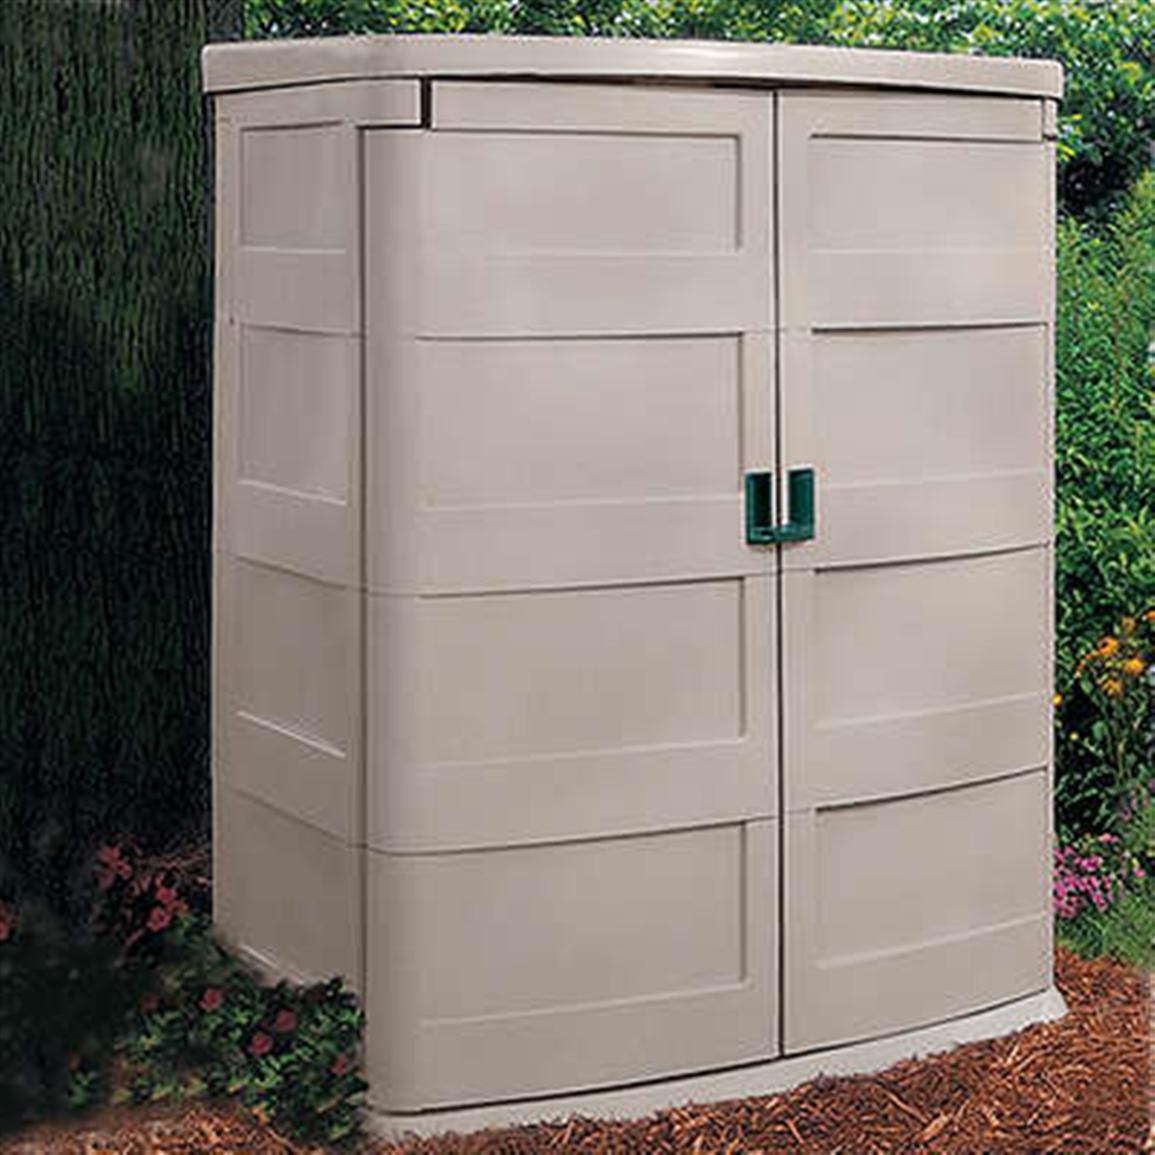 Suncast� Vertical Garden Shed - 138476, Patio Storage at ...